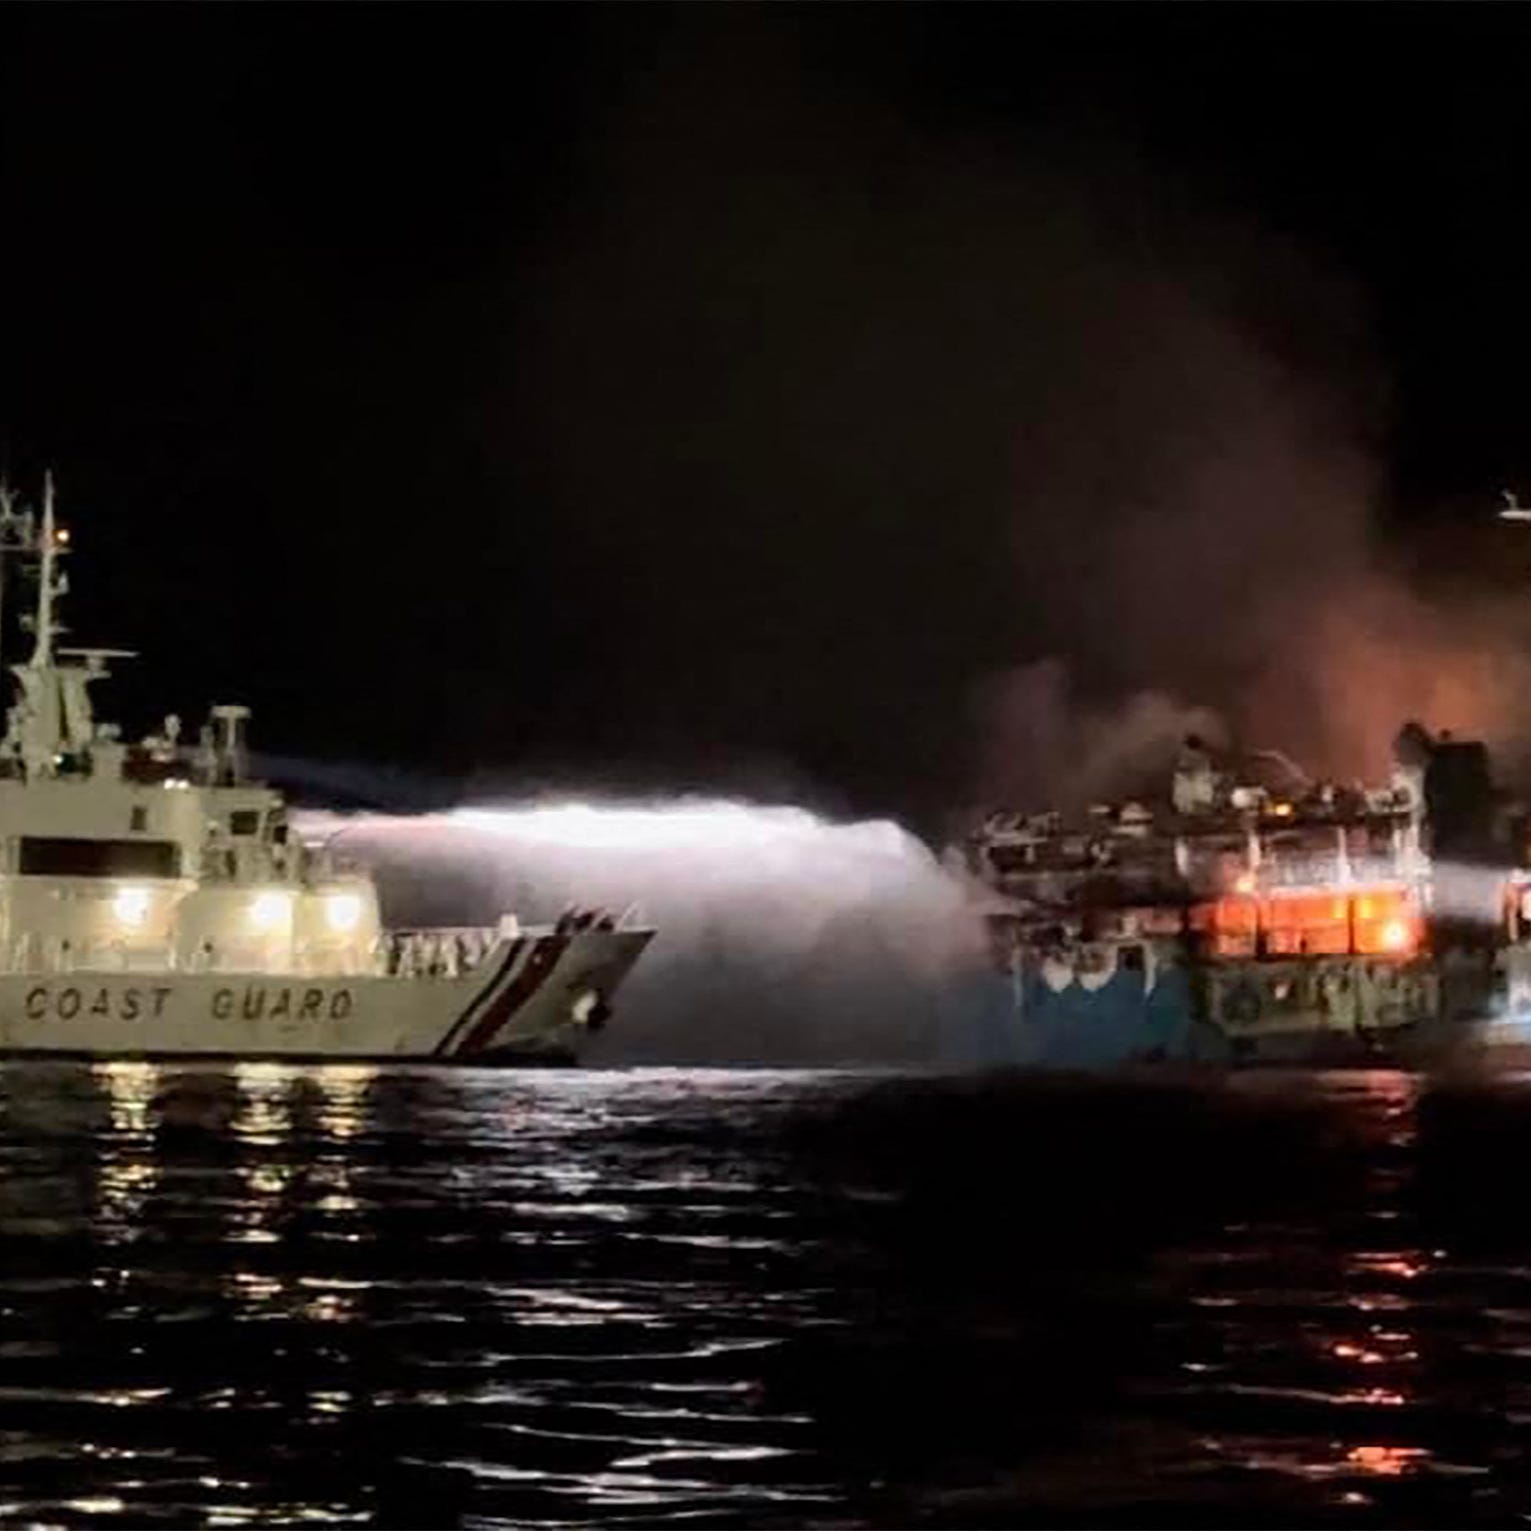 This handout picture taken on March 29, 2023 and released by the Philippine Coast Guard shows the Philippine Coast Guard spraying water on a fire onboard the Lady Mary Joy 3 during a search and rescue operation in waters off Baluk-Baluk Island in Basilan province. - At least 12 people died and 230 were rescued after a fire engulfed a ferry in the southern Philippines, authorities said on March 30.